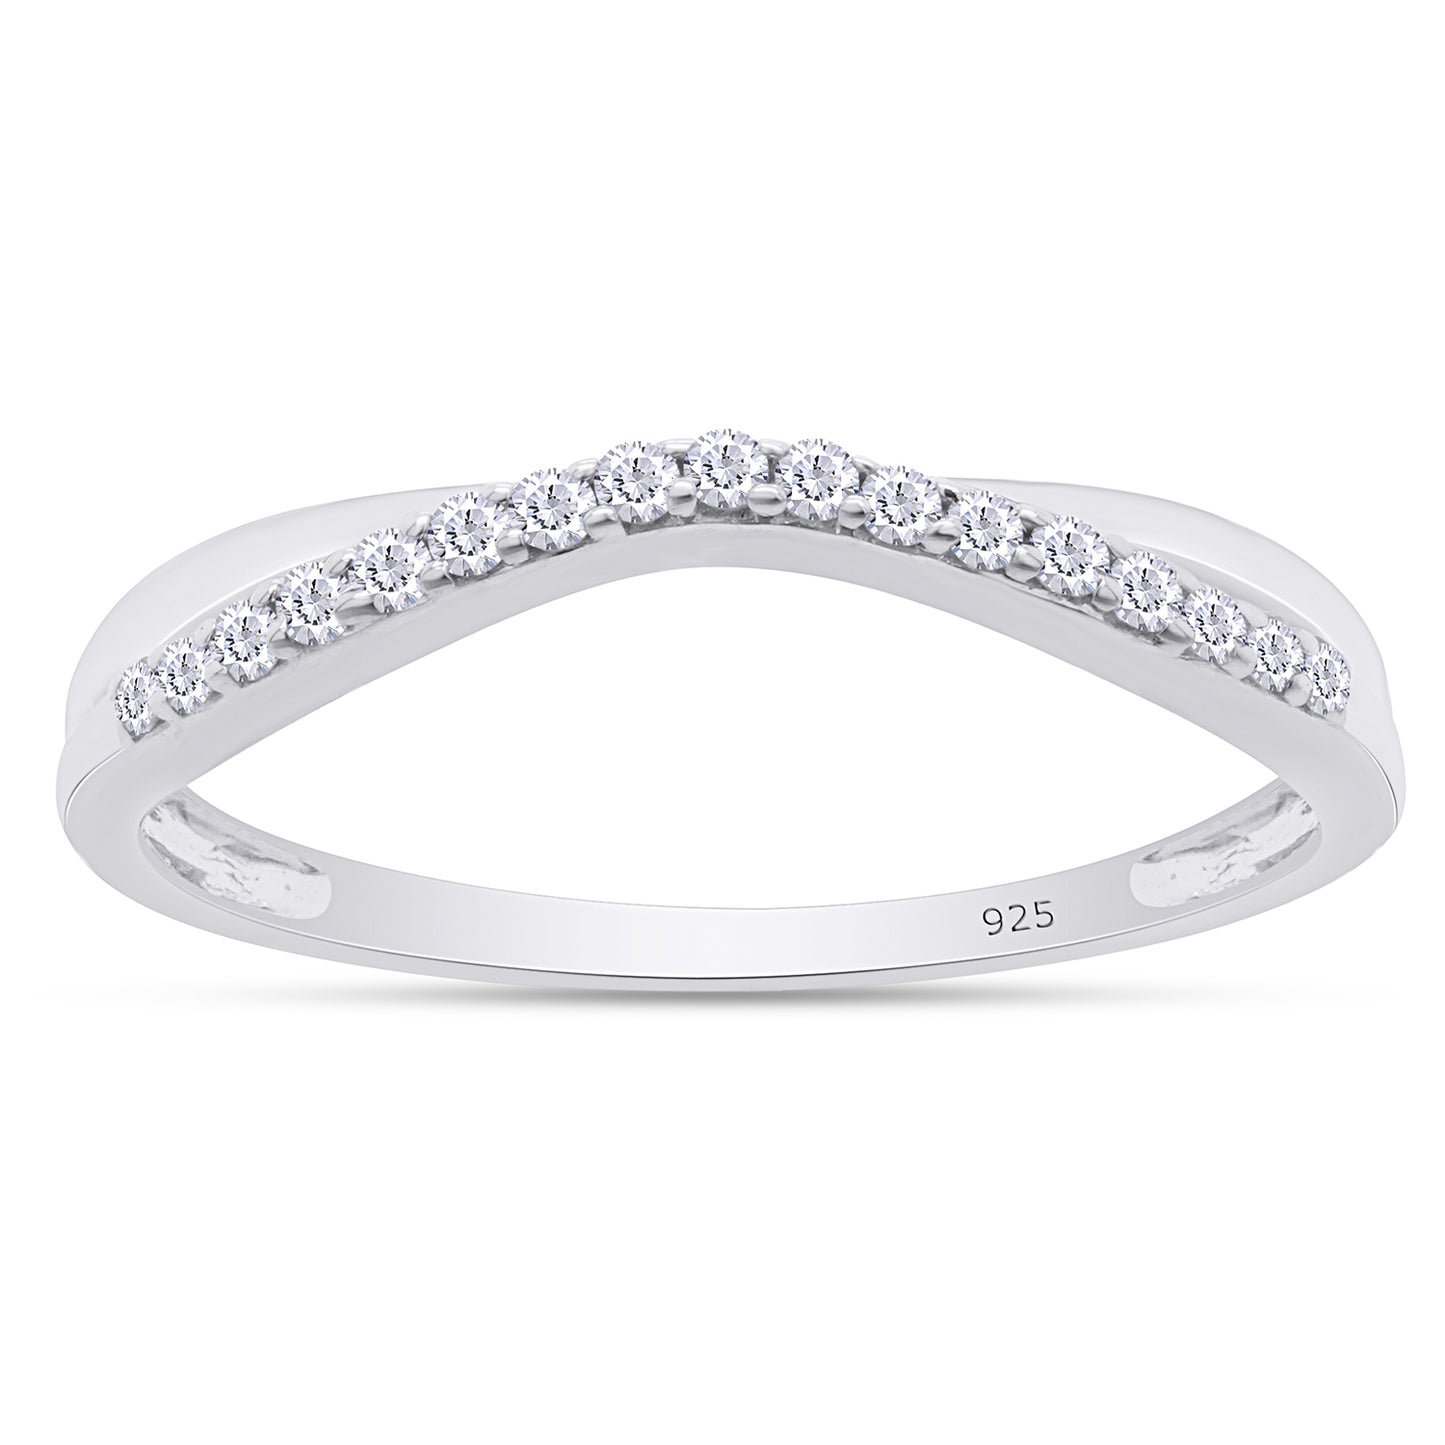 1/10 Carat Round White Natural Diamond Twist Contour Enhancer Guard Band Ring In 925 Sterling Silver